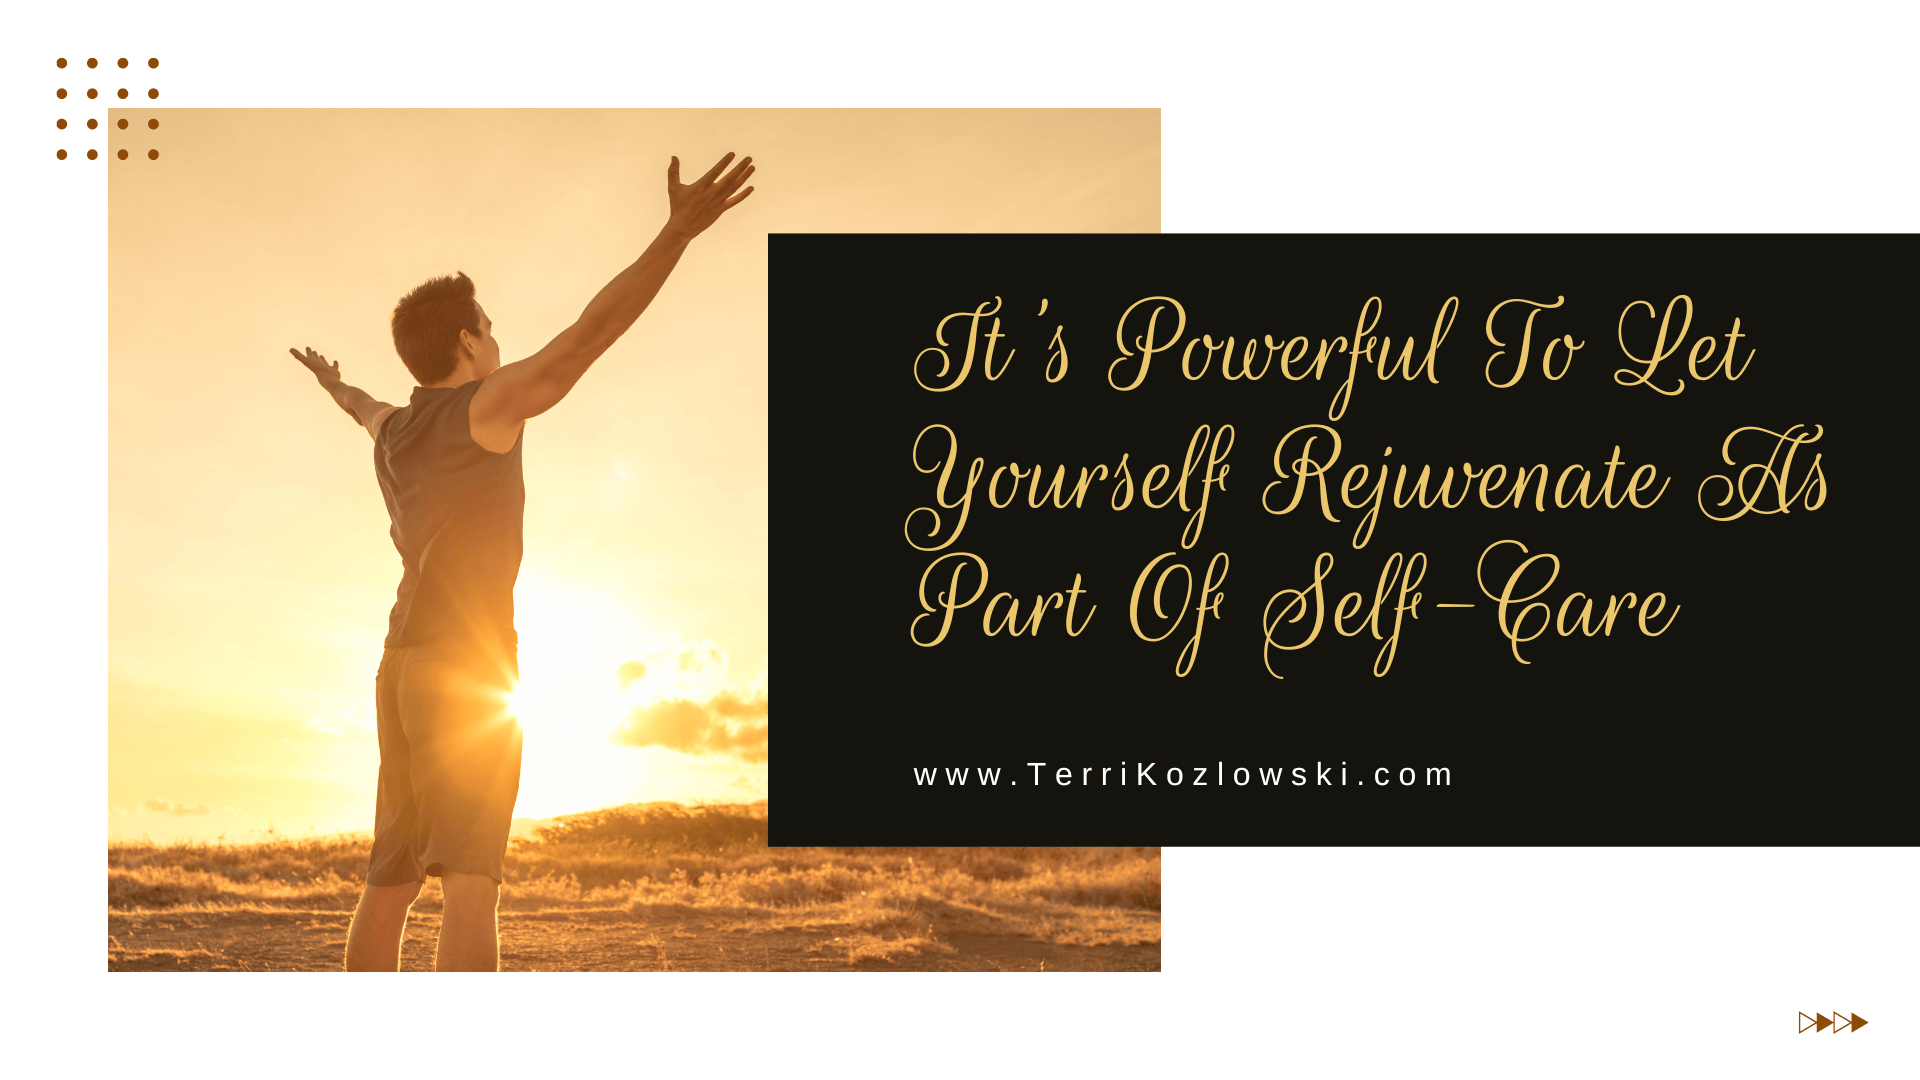 It's Powerful To Let Yourself Rejuvenate As Part Of Self-Care